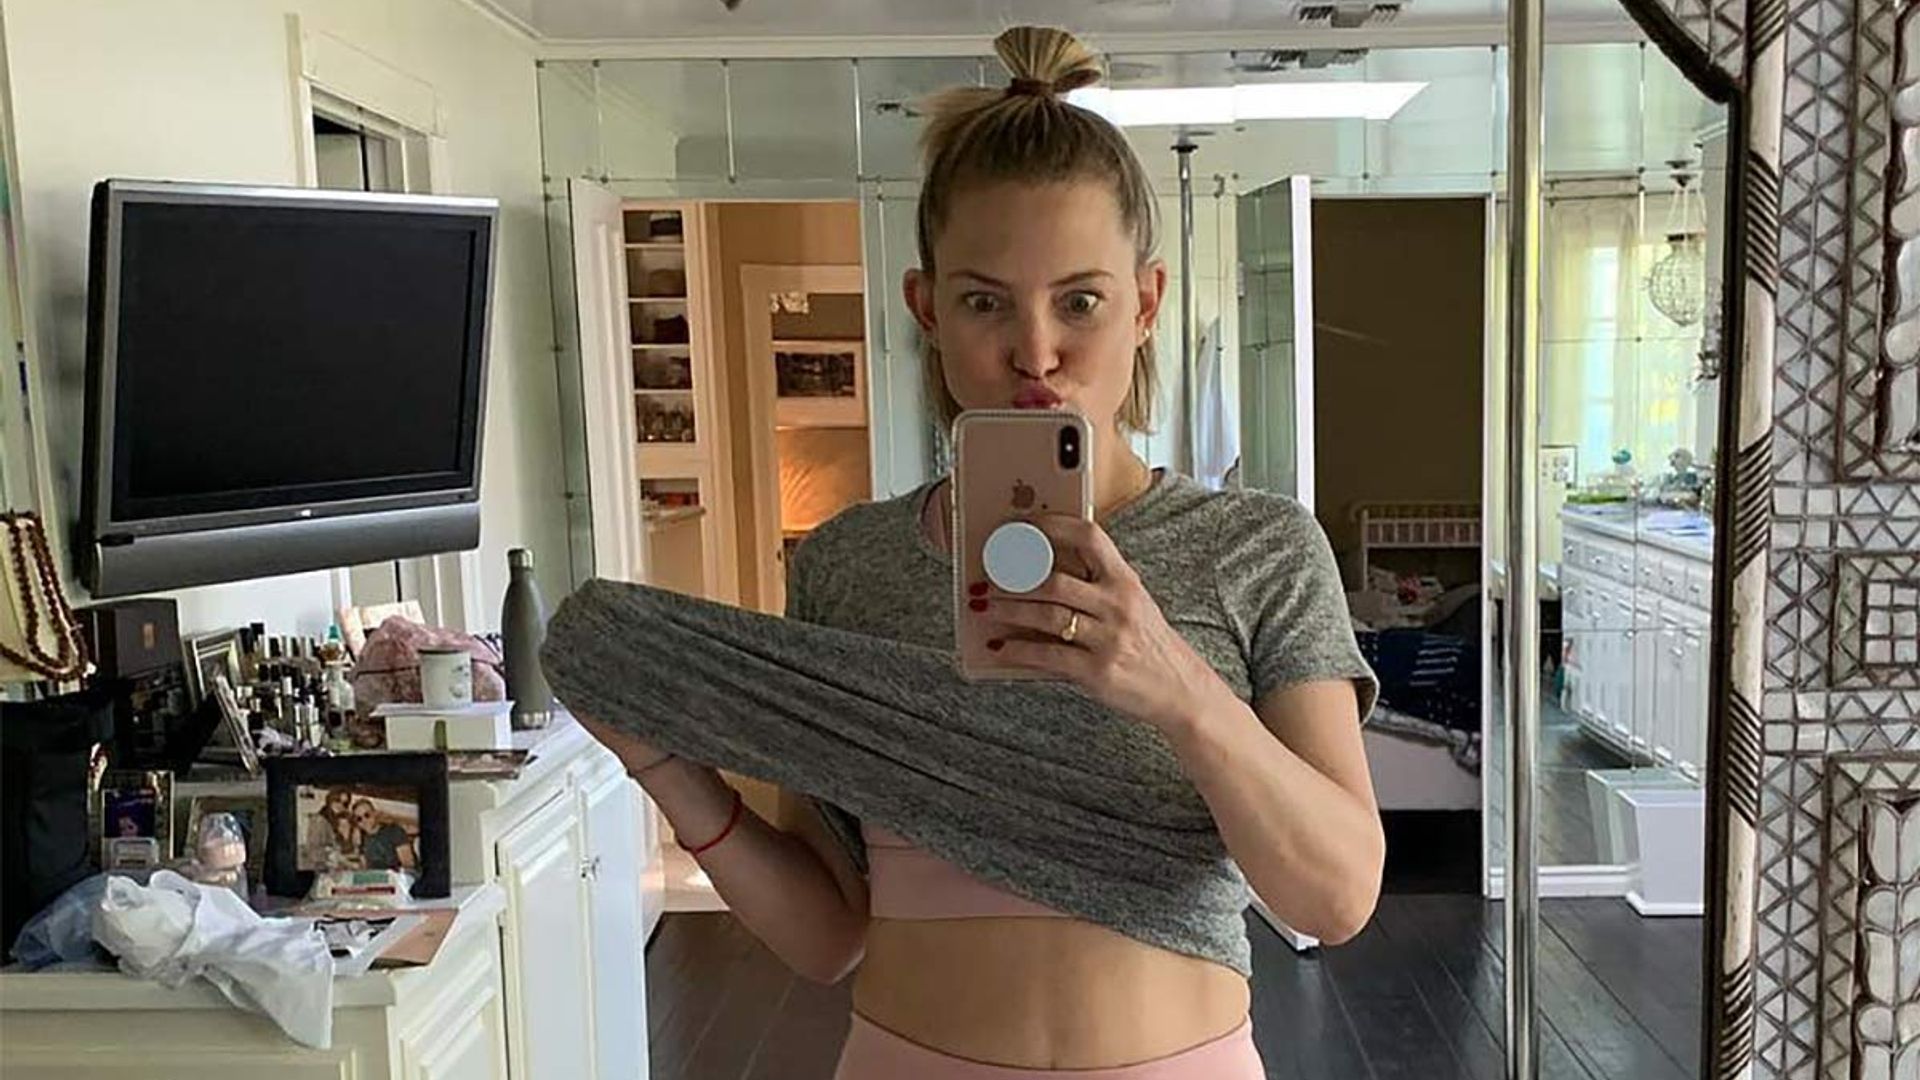 Kate Hudson shares glimpse of designer slippers as she shows off her abs in new gym clothes